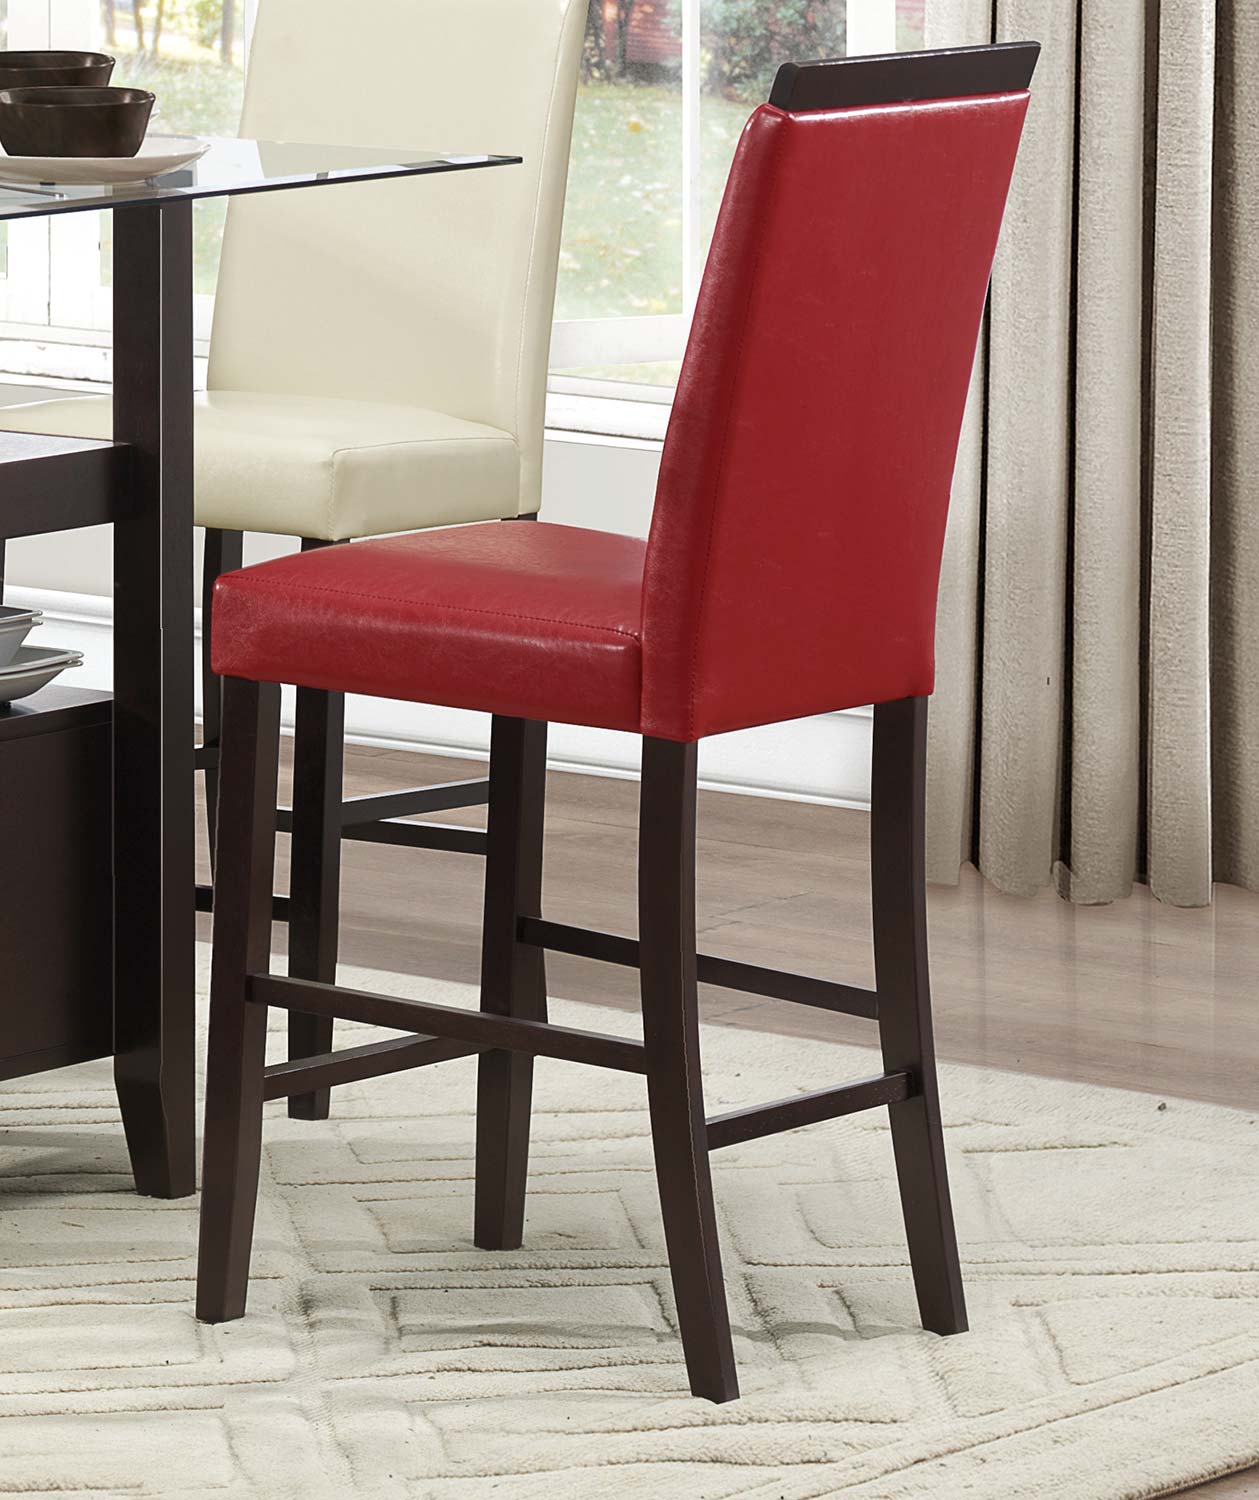 Homelegance Bari Counter Height Chair - Red